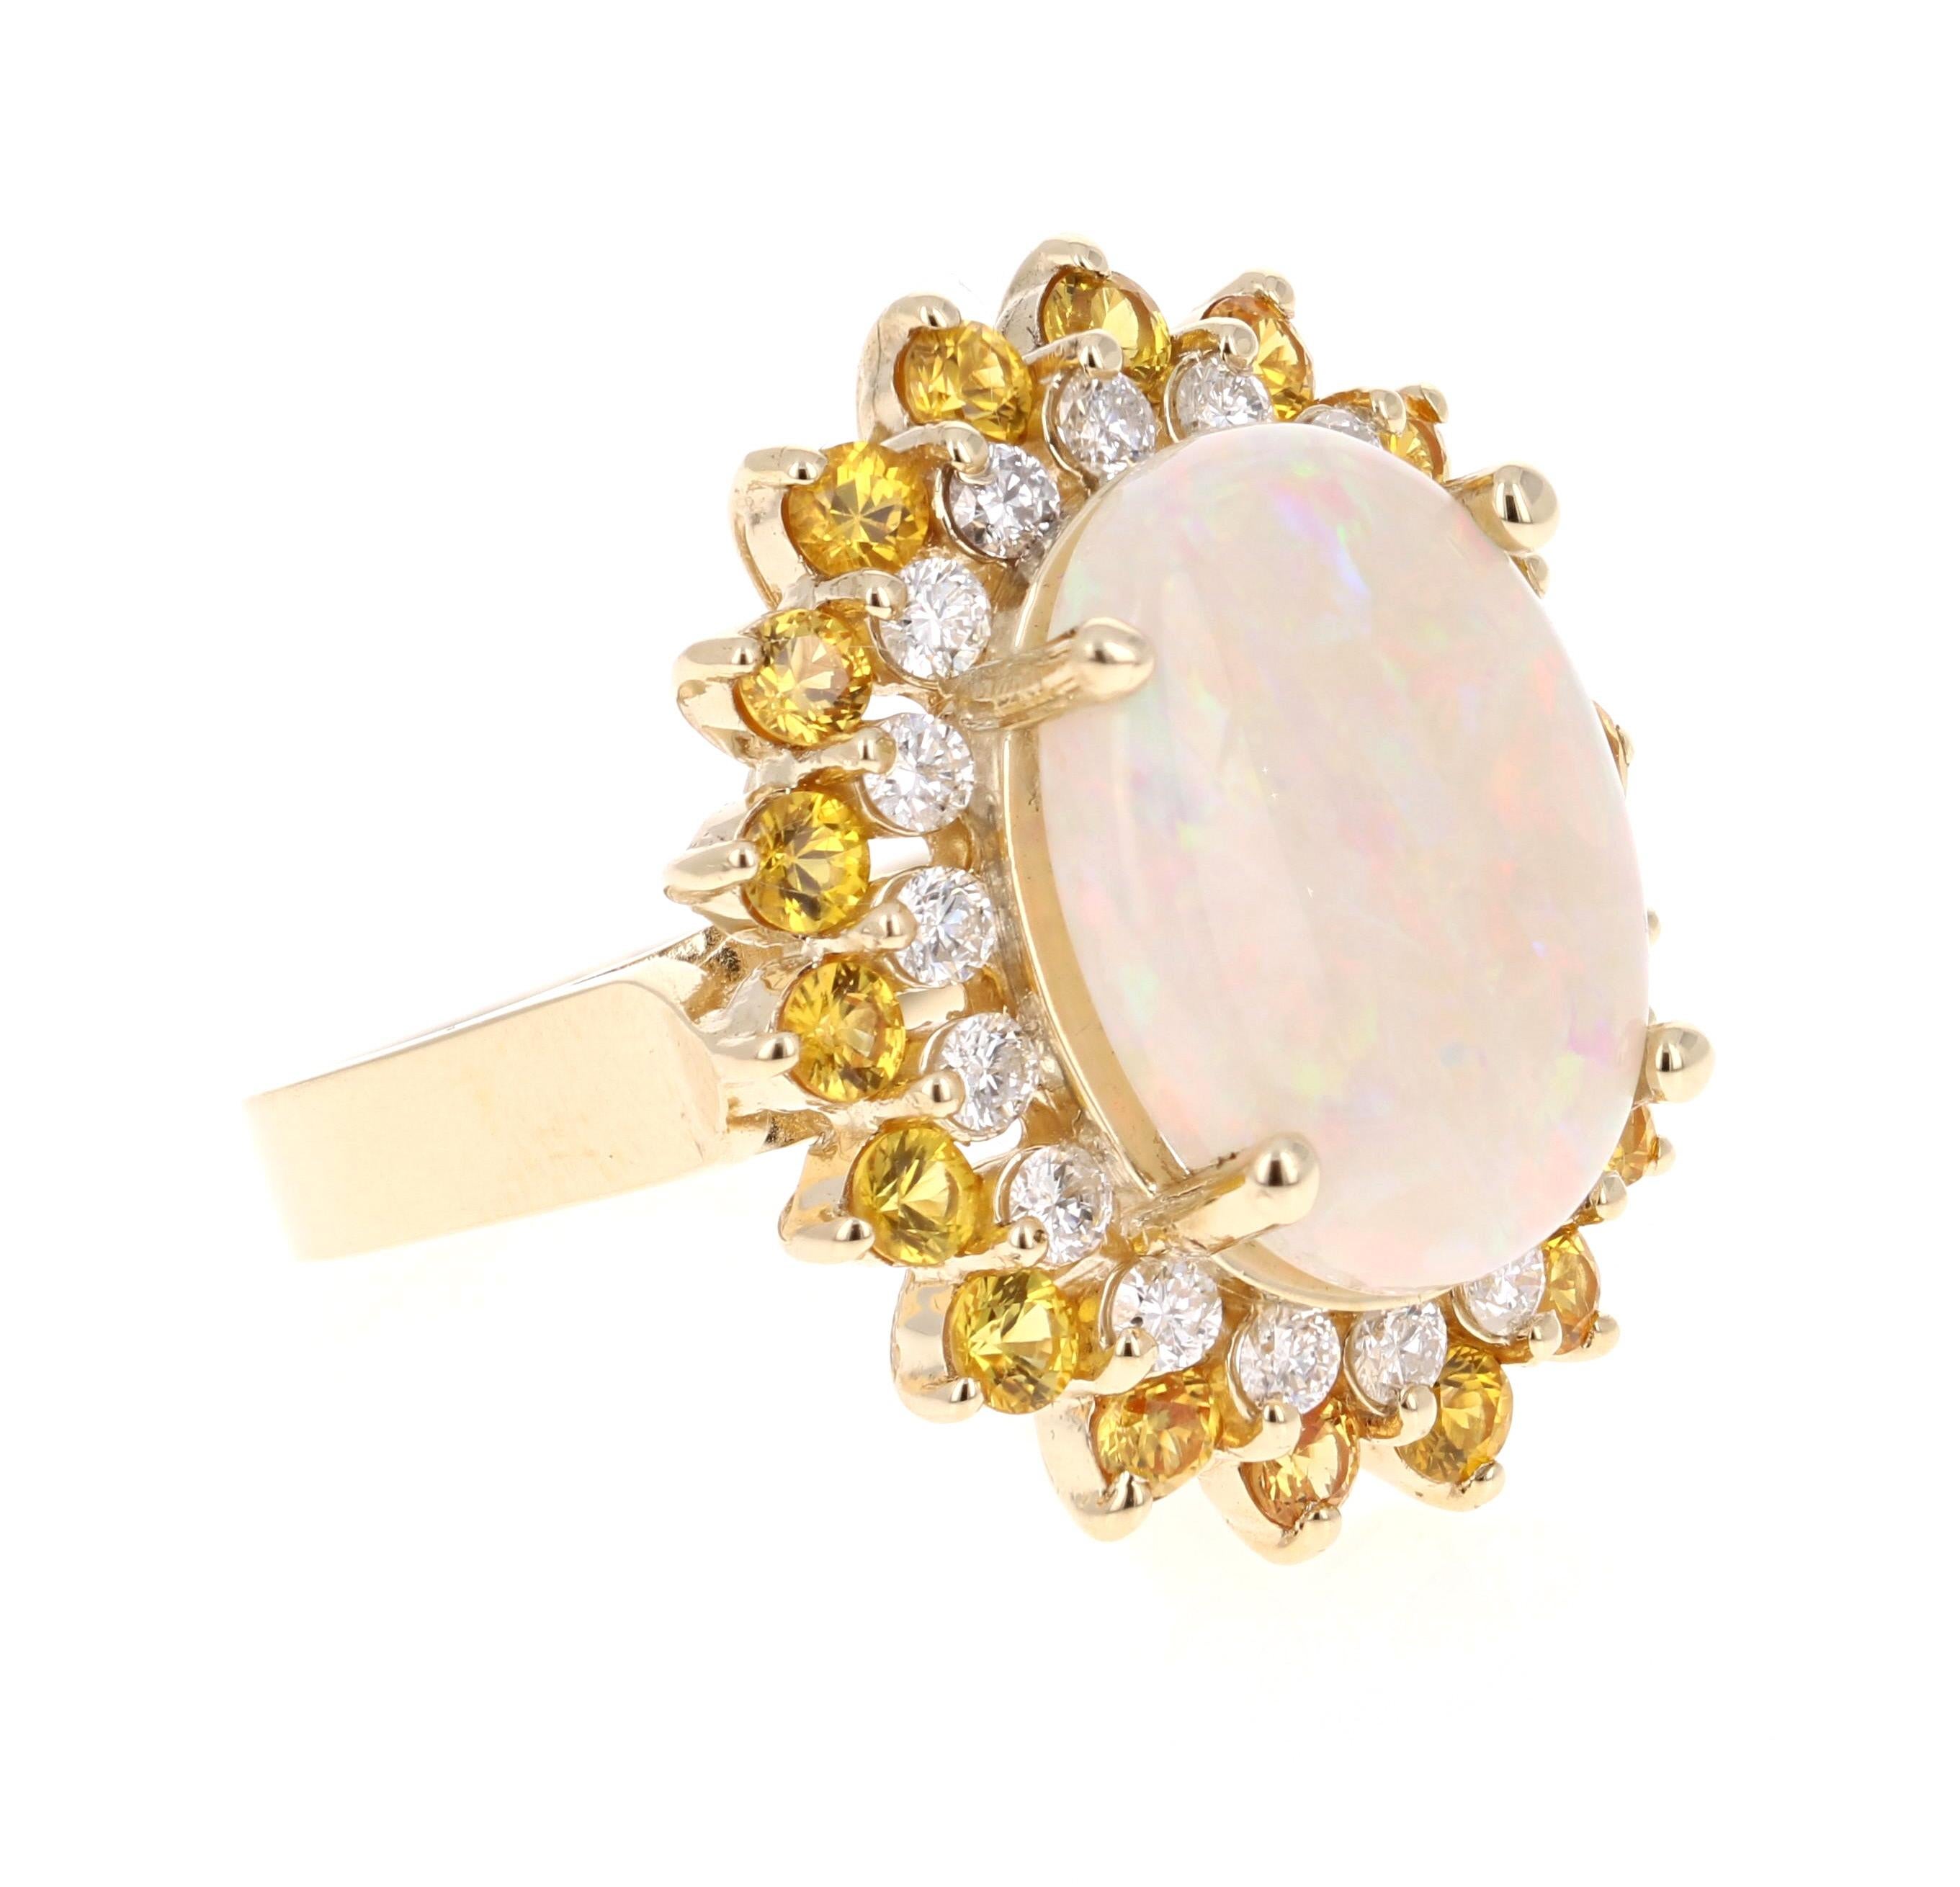 Gorgeous and uniquely designed Opal and Diamond Ring with a vibrancy of Yellow Sapphires!

This stunning piece has a 5.47 carat opulent Opal set in the center of the ring.  The Opal is surrounded by a row of  18 Round Cut Diamonds that weigh 0.68